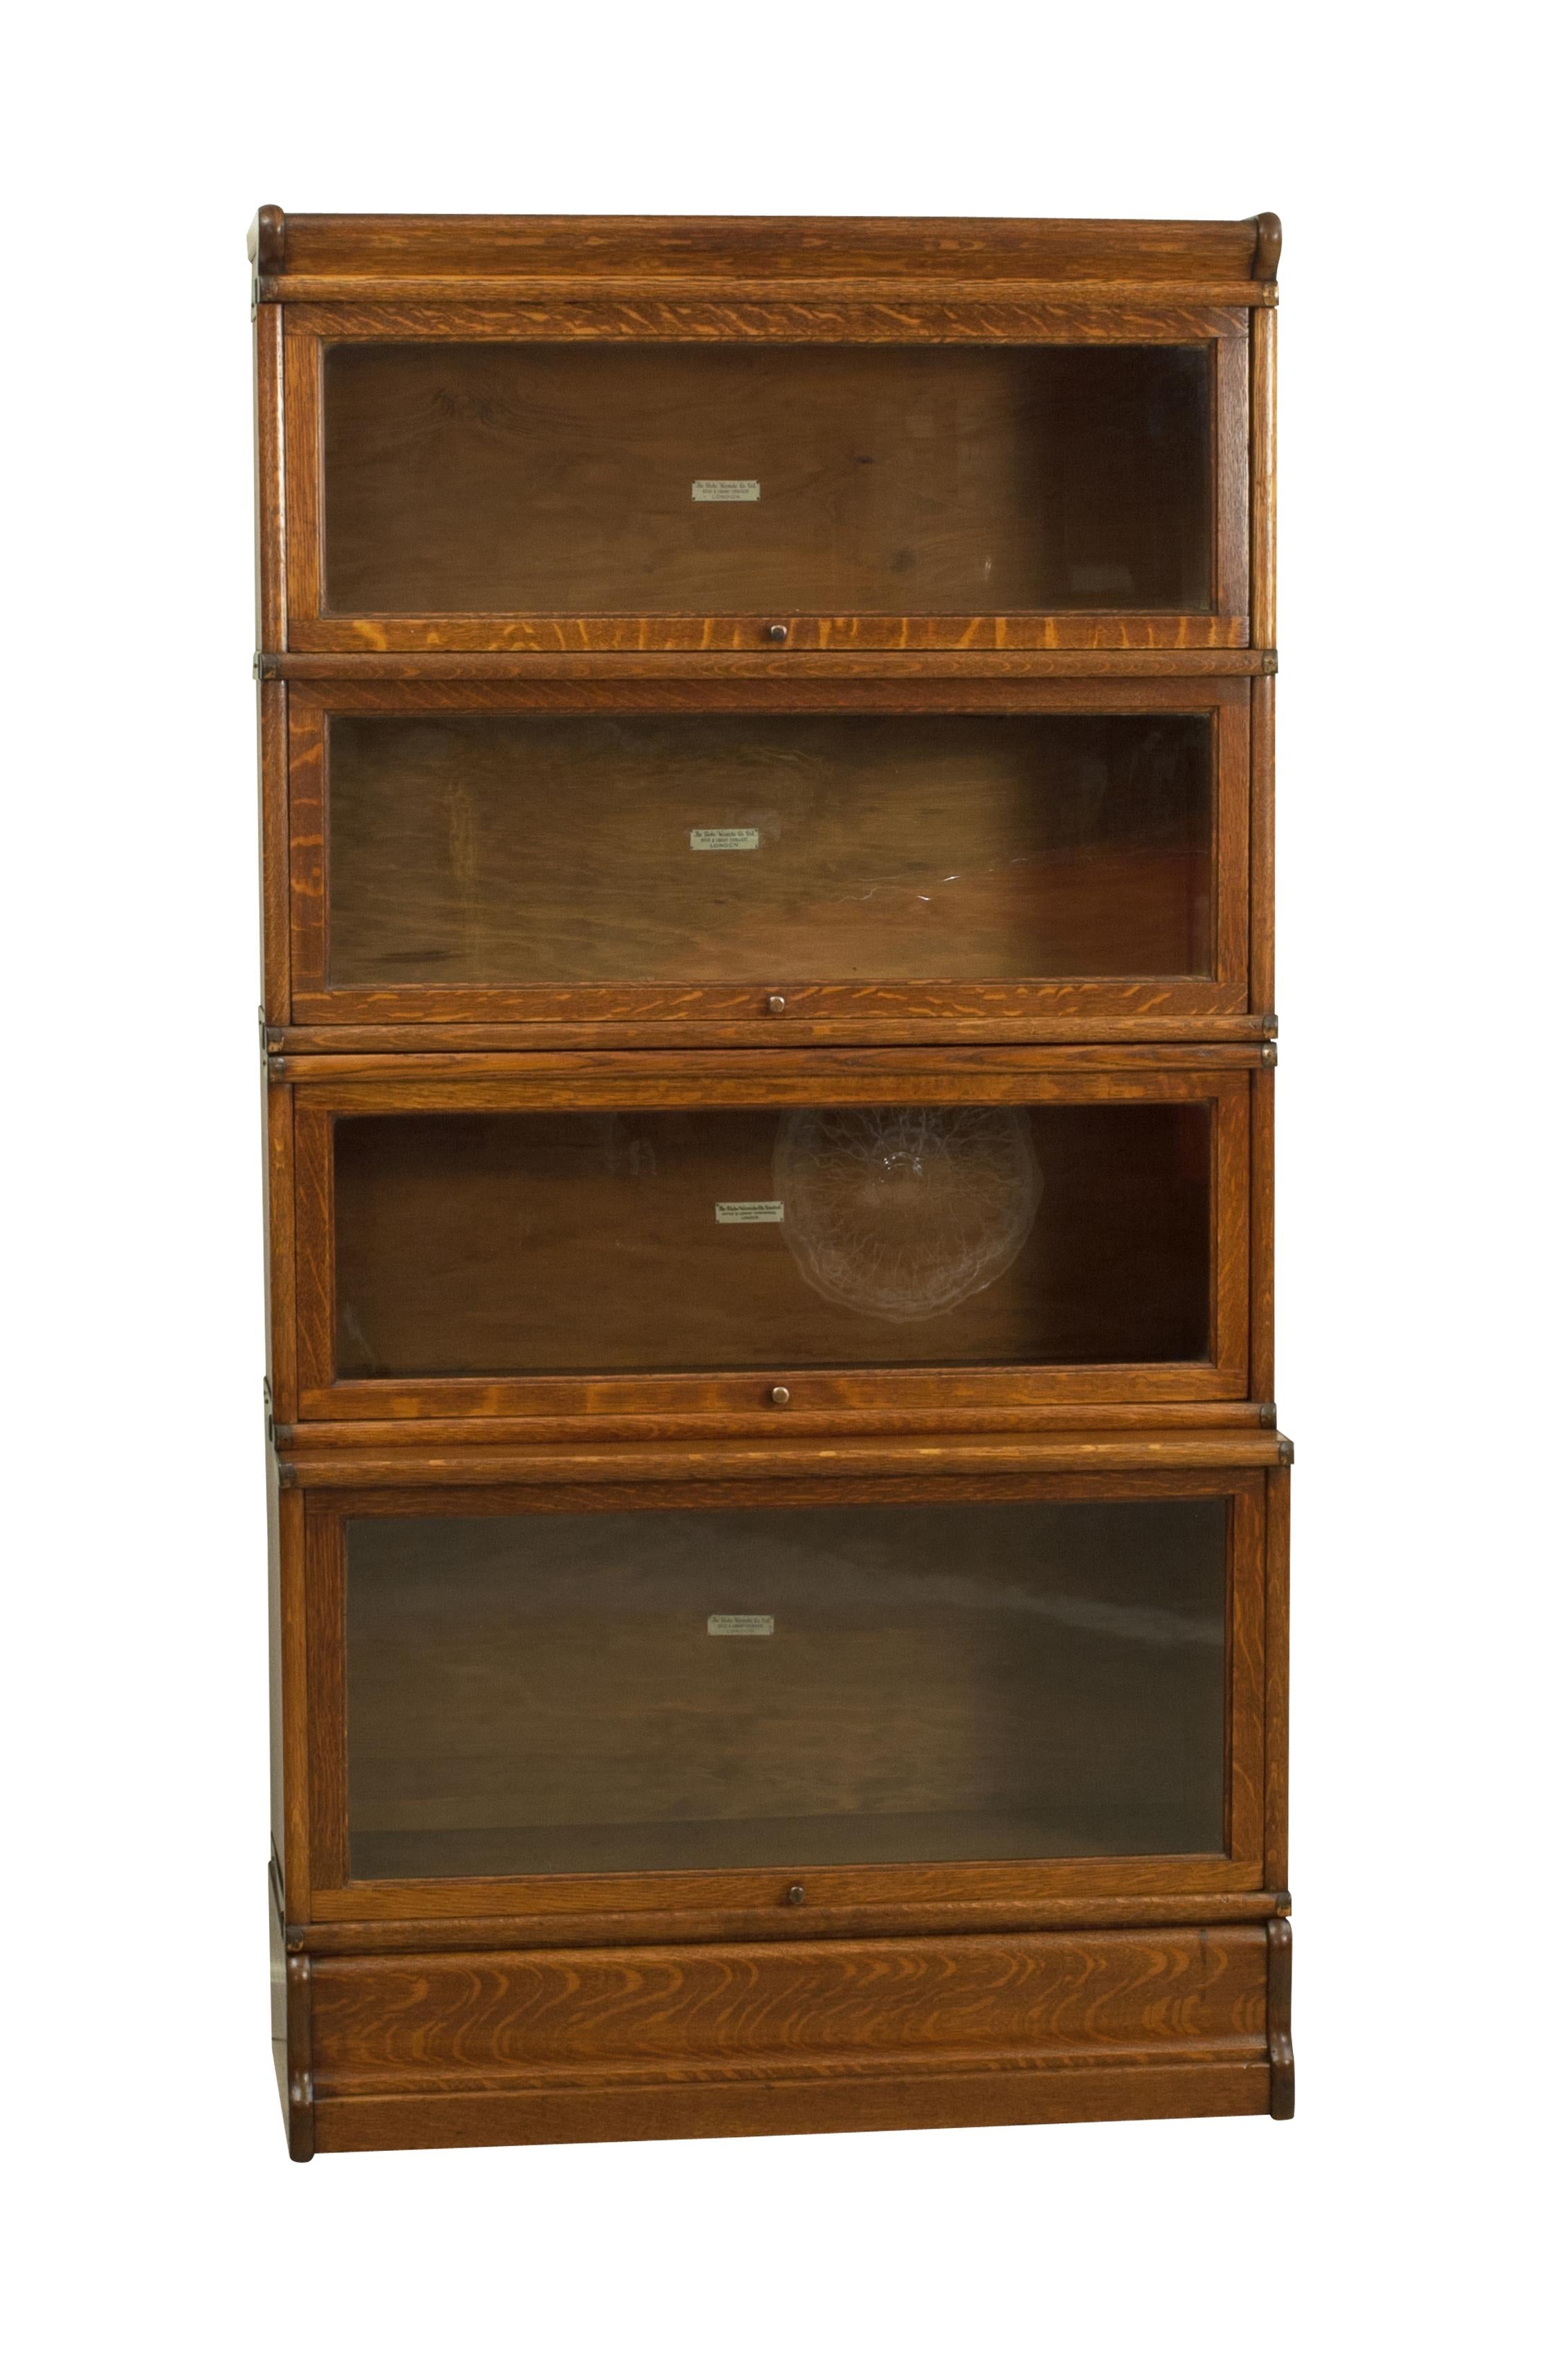 Oak Globe Wernicke bookcase, DVD cabinet.
Antique stacking or barrister's bookcase made by 'The Globe-Wernicke Co. Ltd, London'. The four sectional glazed bookcase with up and over single pane glazed doors, graduated four tier storage units with a